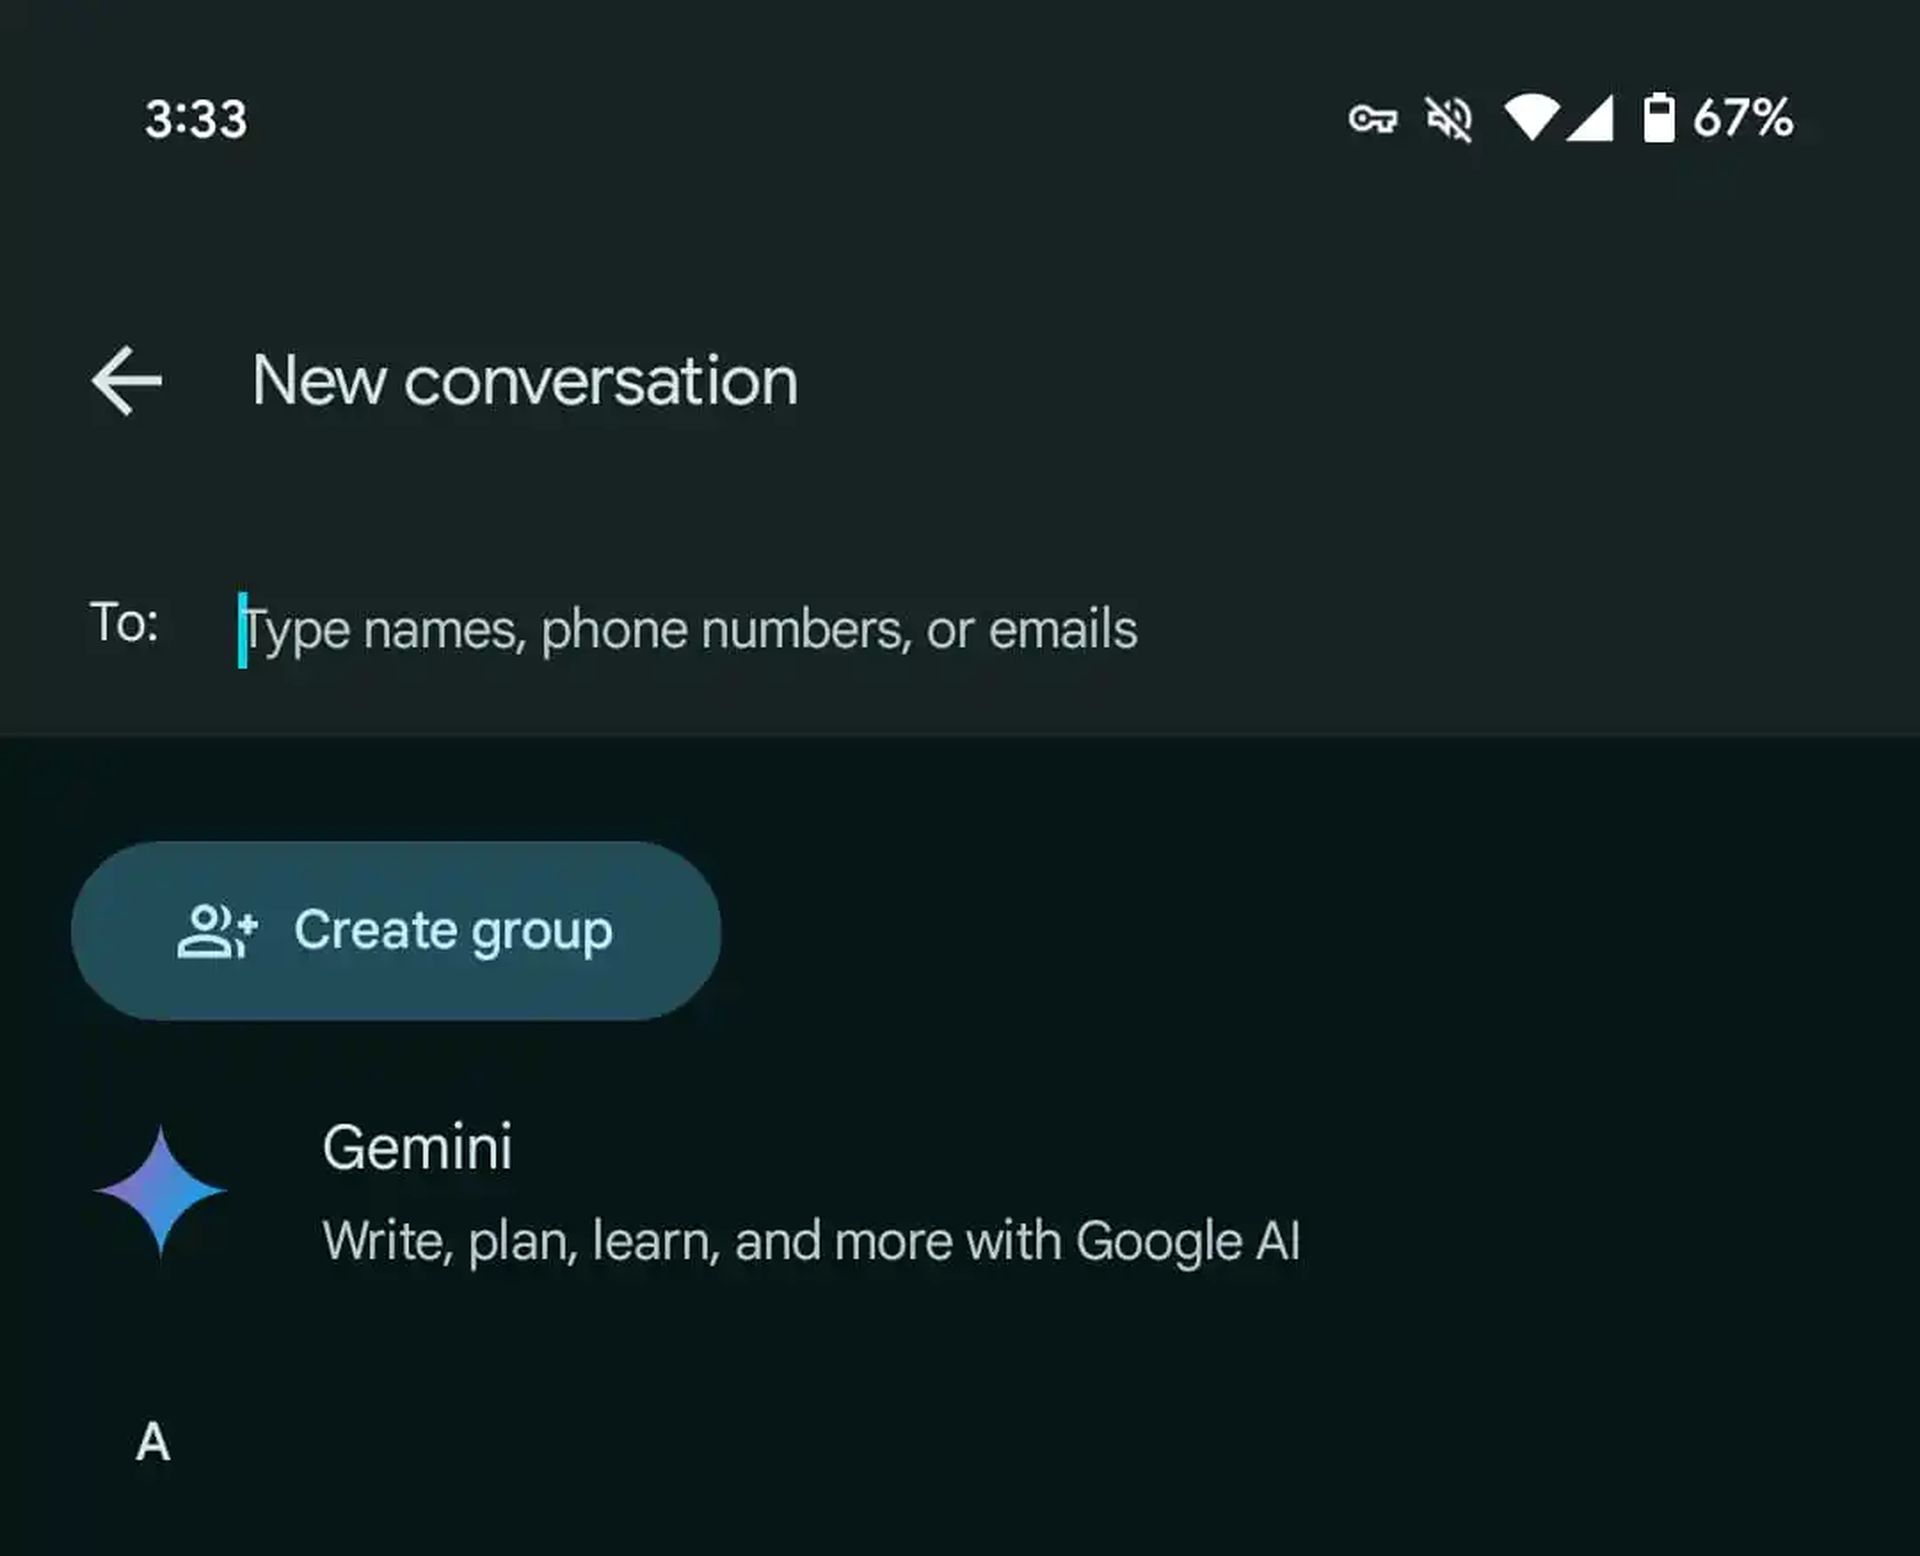 How to use Gemini AI in Google Messages: Unlock the power of Gemini's suggestions and messaging features. Explore now!